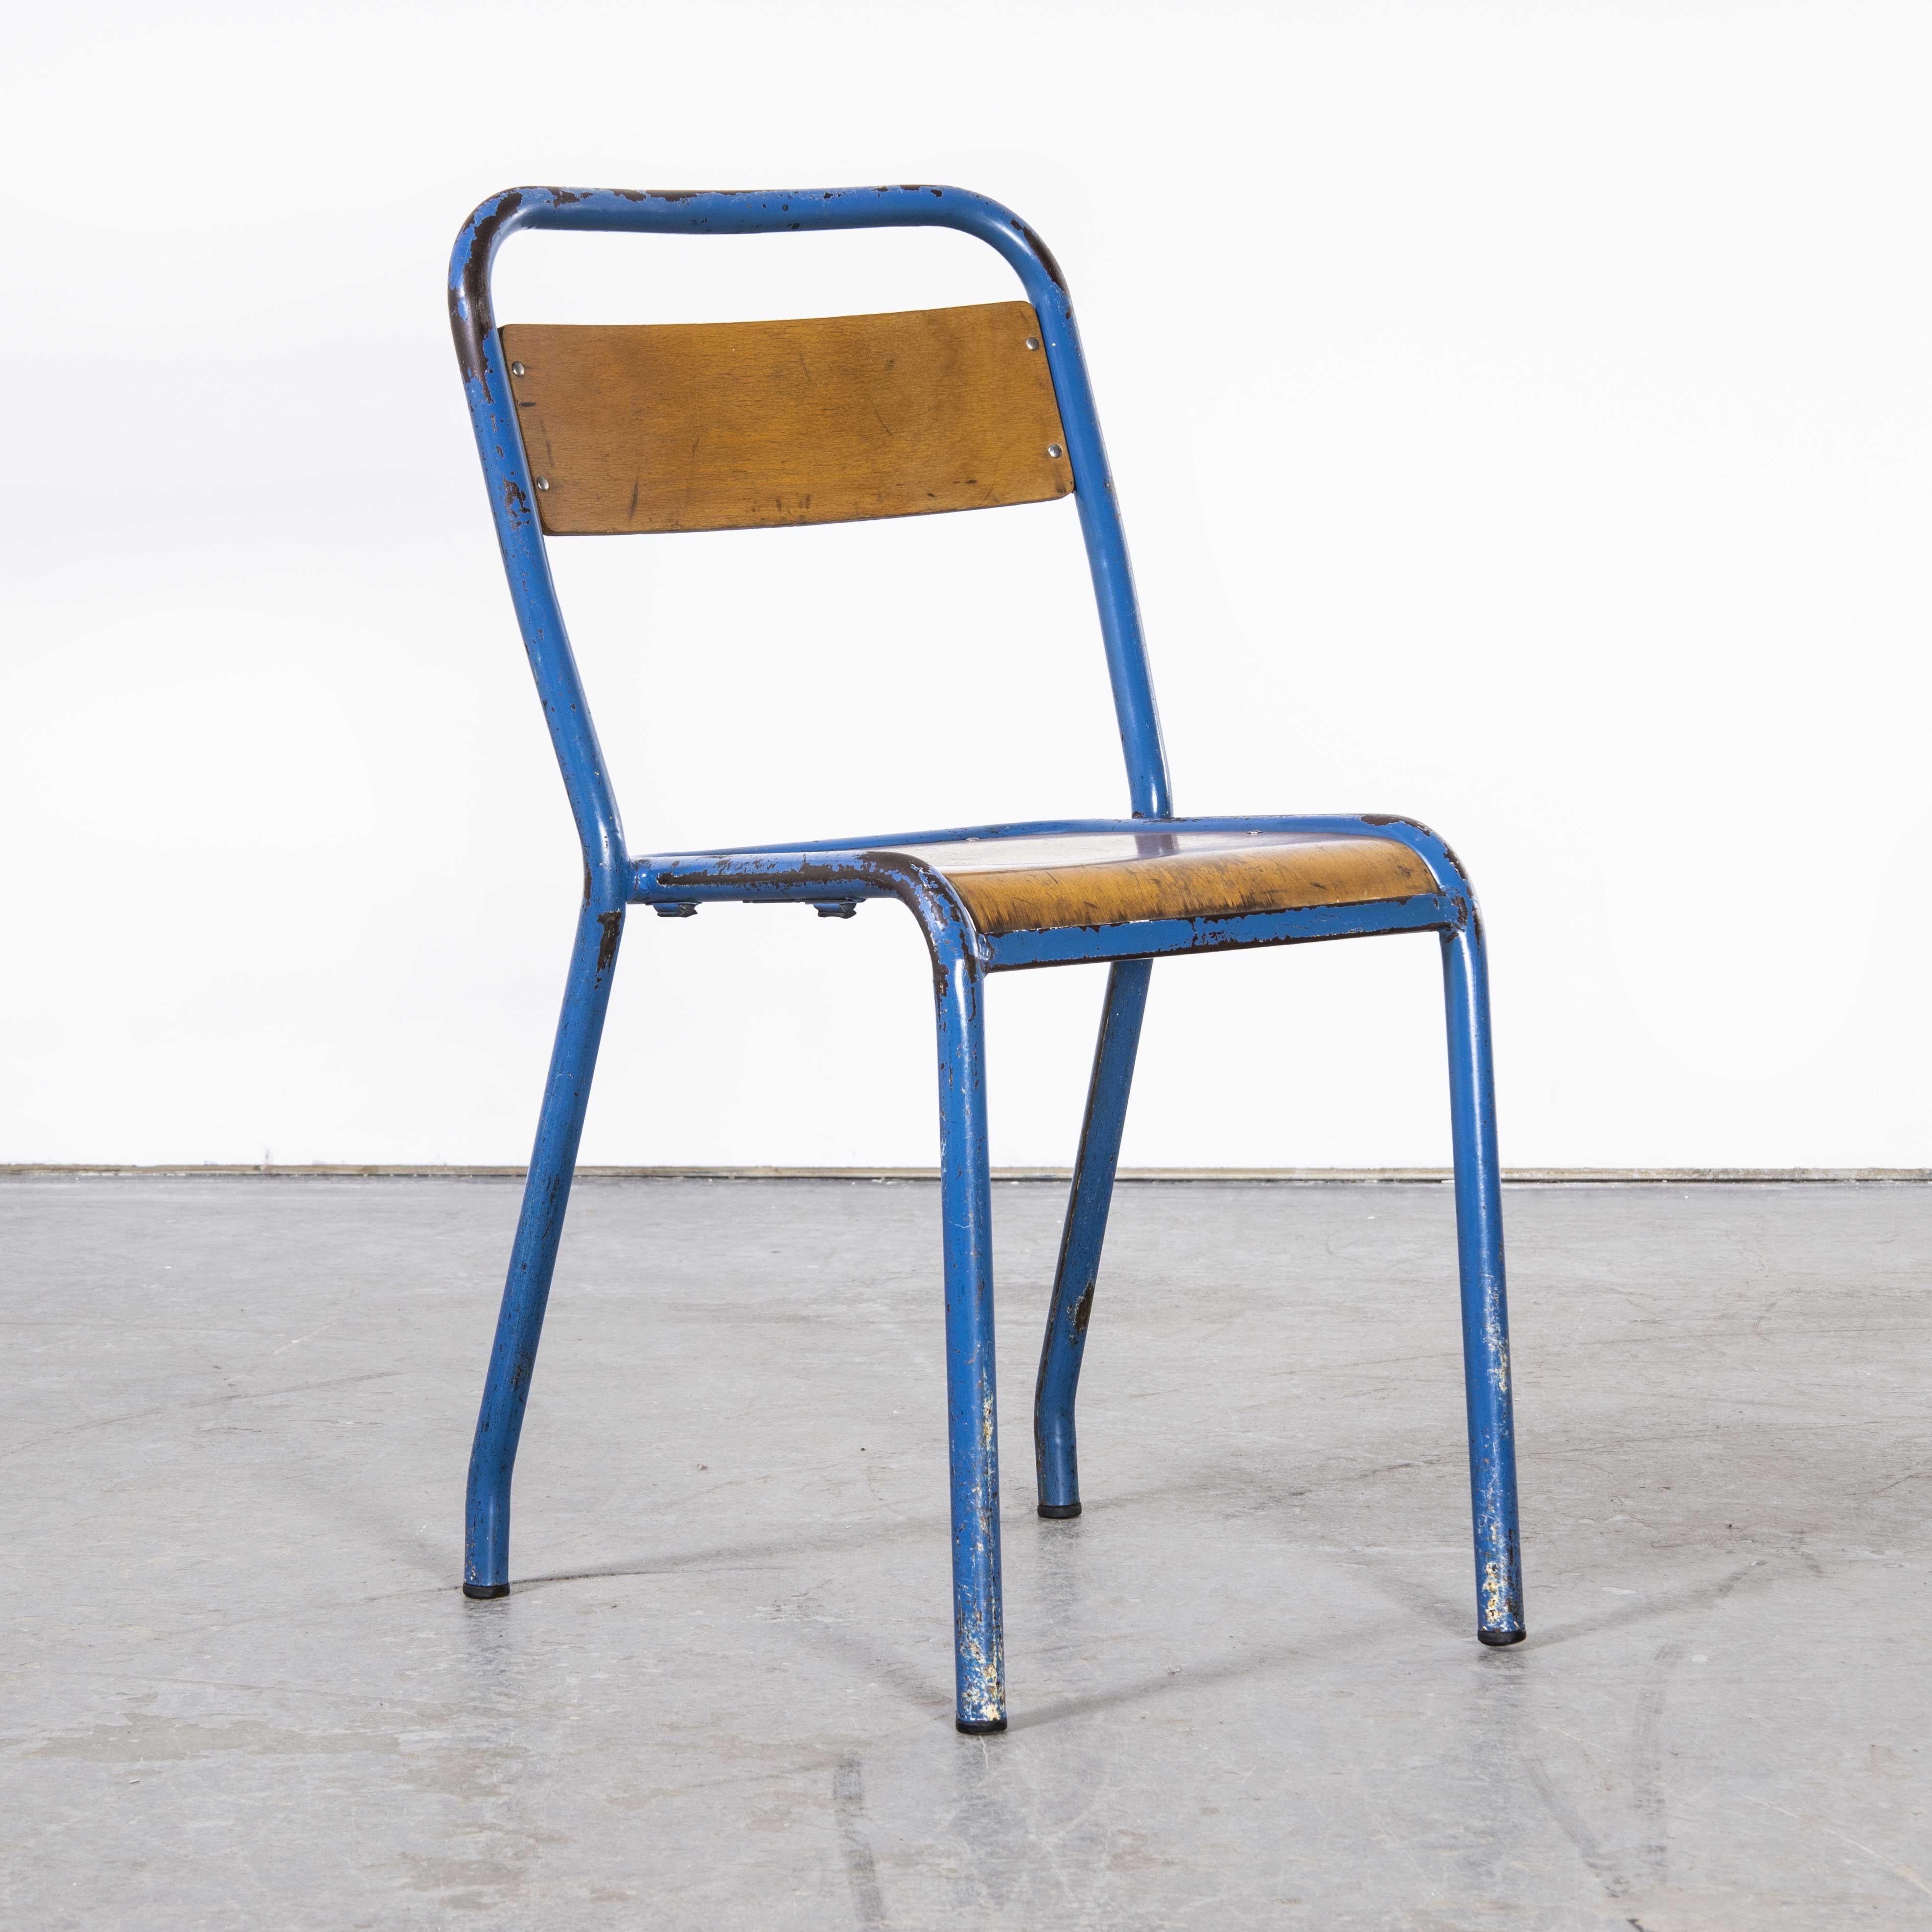 1950’s Original Blue French Tolix Wood Seat Metal Bistro dining chair – set of ten
1950’s Original Blue French Tolix Wood Seat Metal Bistro dining chair – set of ten. Tolix is one of our all time favourite companies. In 1907 Frenchman Xavier